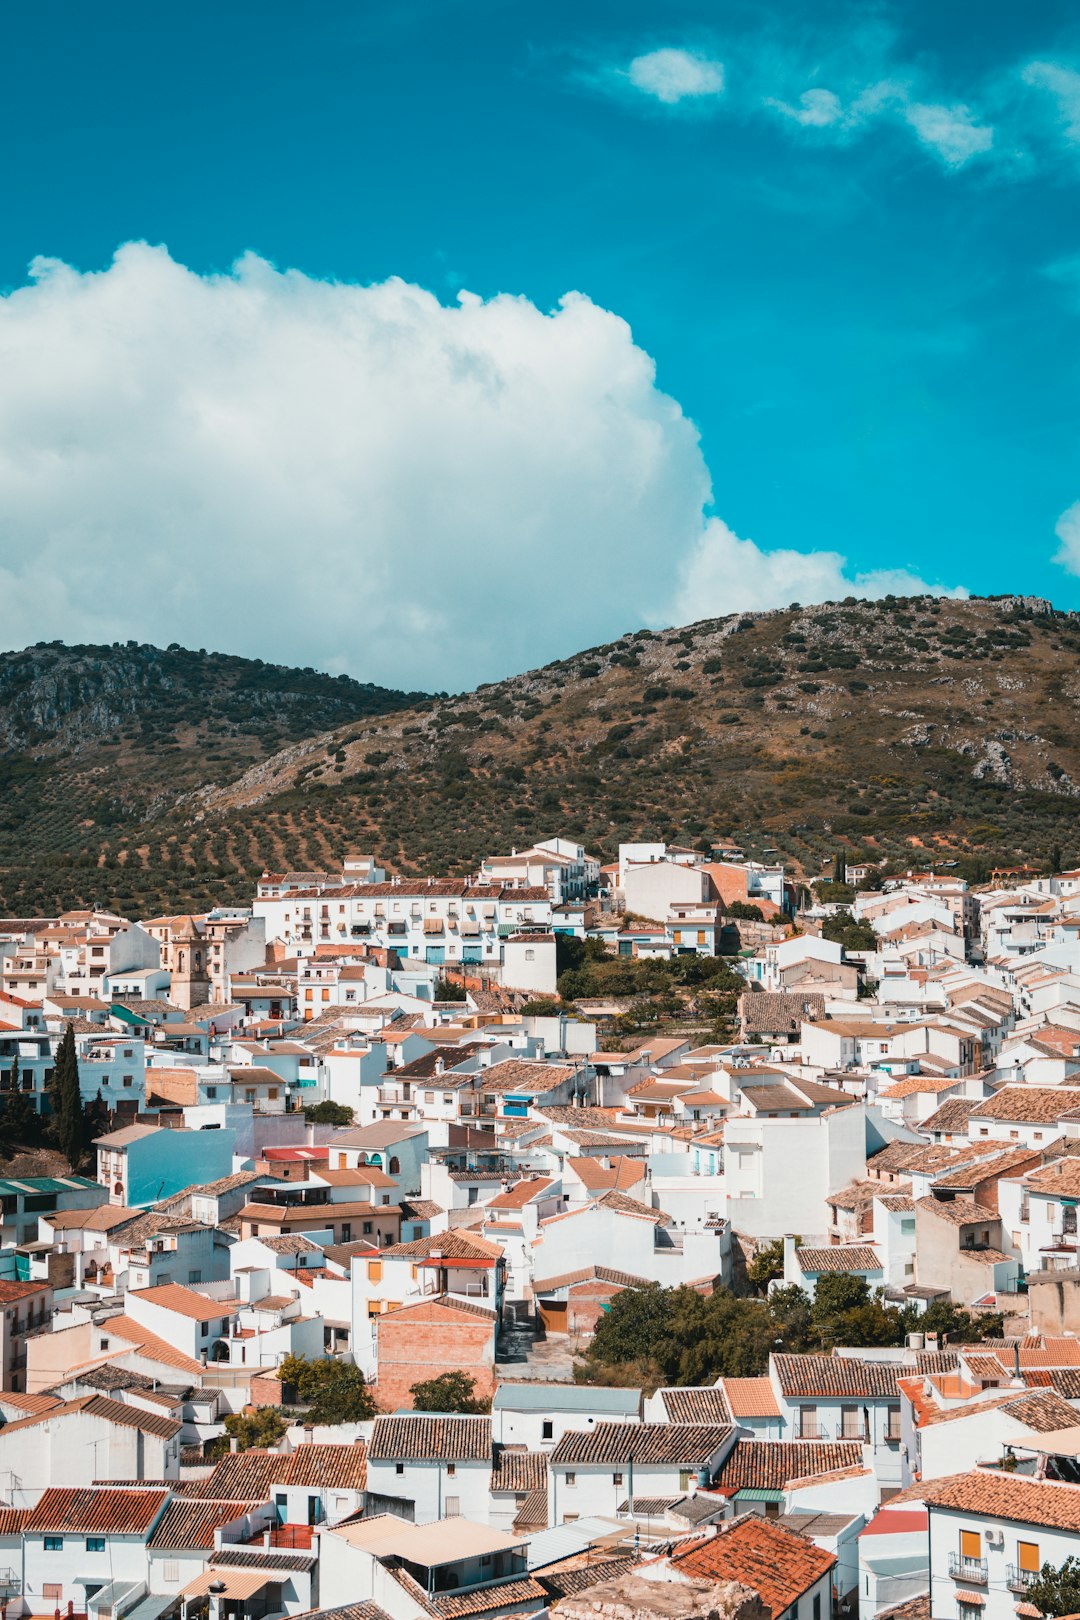 Travel Tips and Stories of Luque in Spain